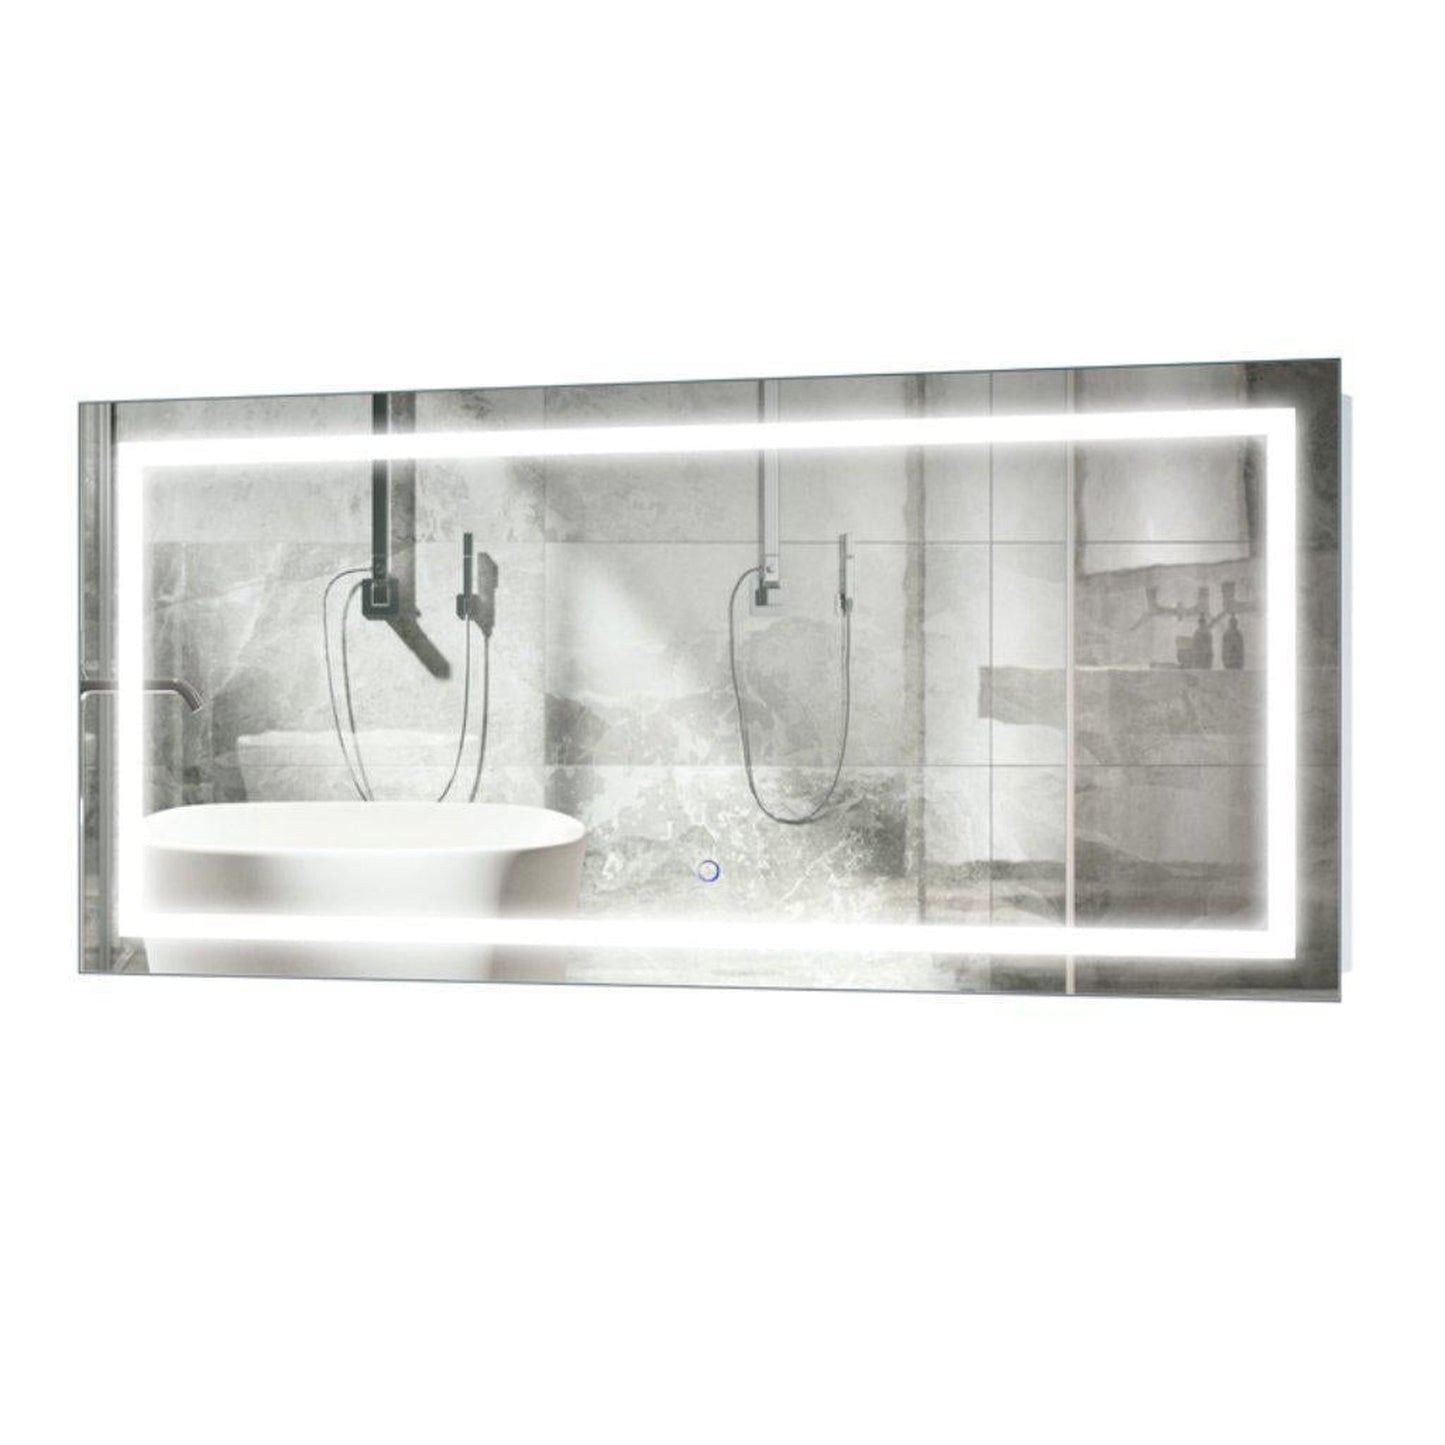 Krugg Reflections Icon 48” x 24” 5000K Rectangular Wall-Mounted Illuminated Silver Backed LED Mirror With Built-in Defogger and Touch Sensor On/Off Built-in Dimmer